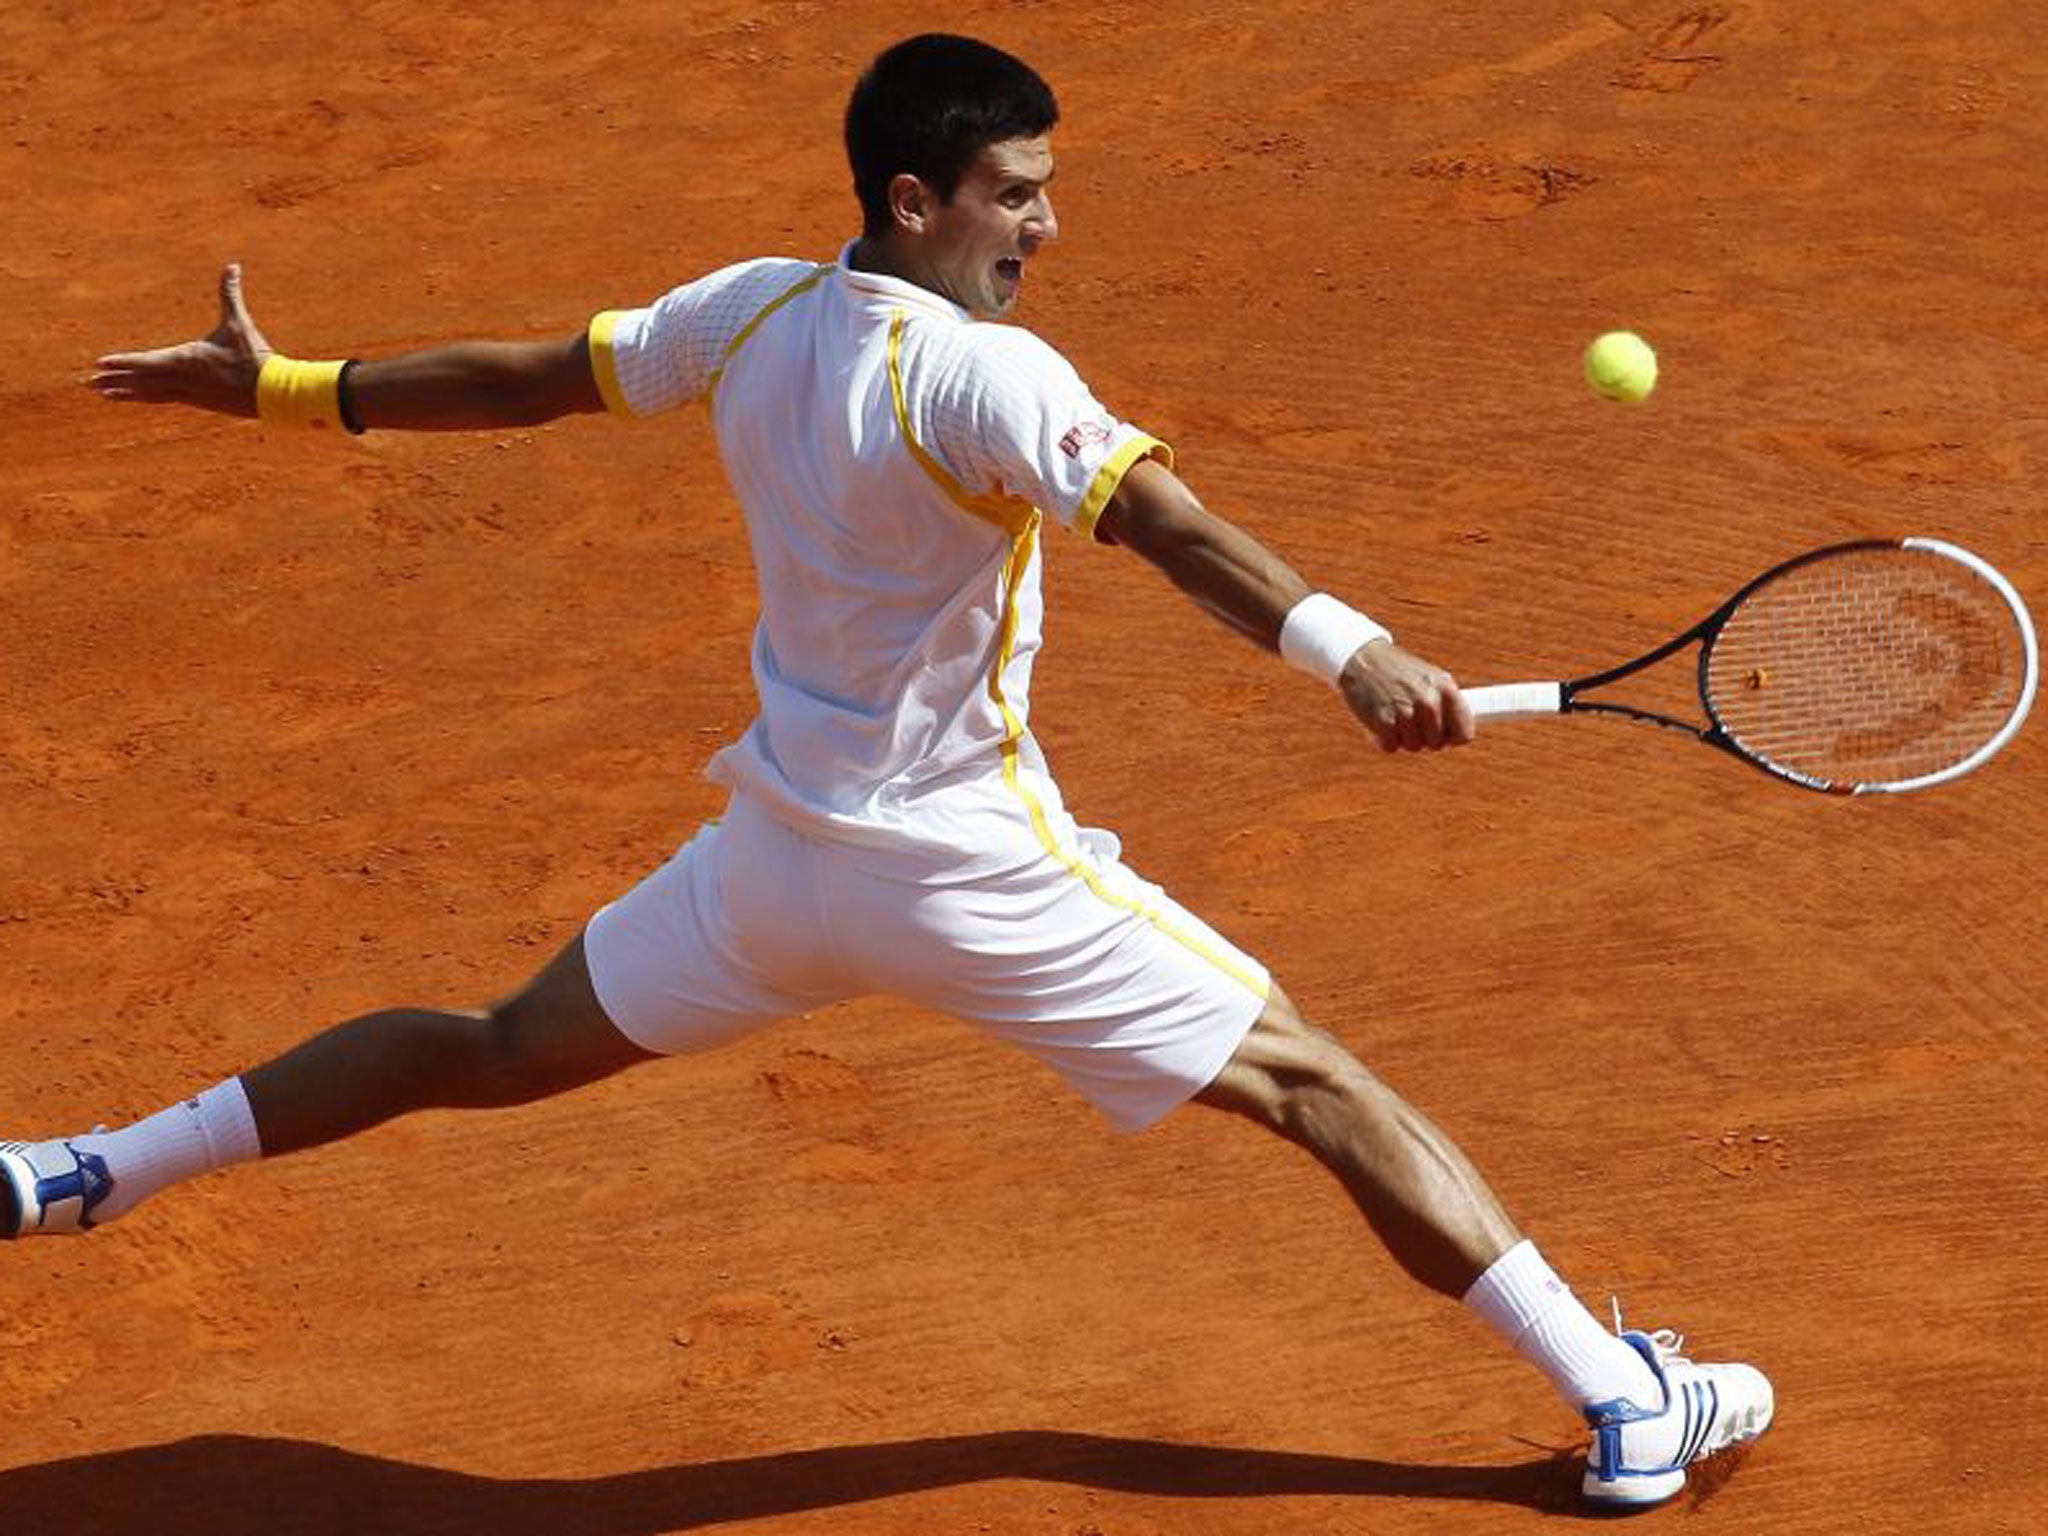 Novak Djokovic stretches to make a backhand in the Monte Carlo final